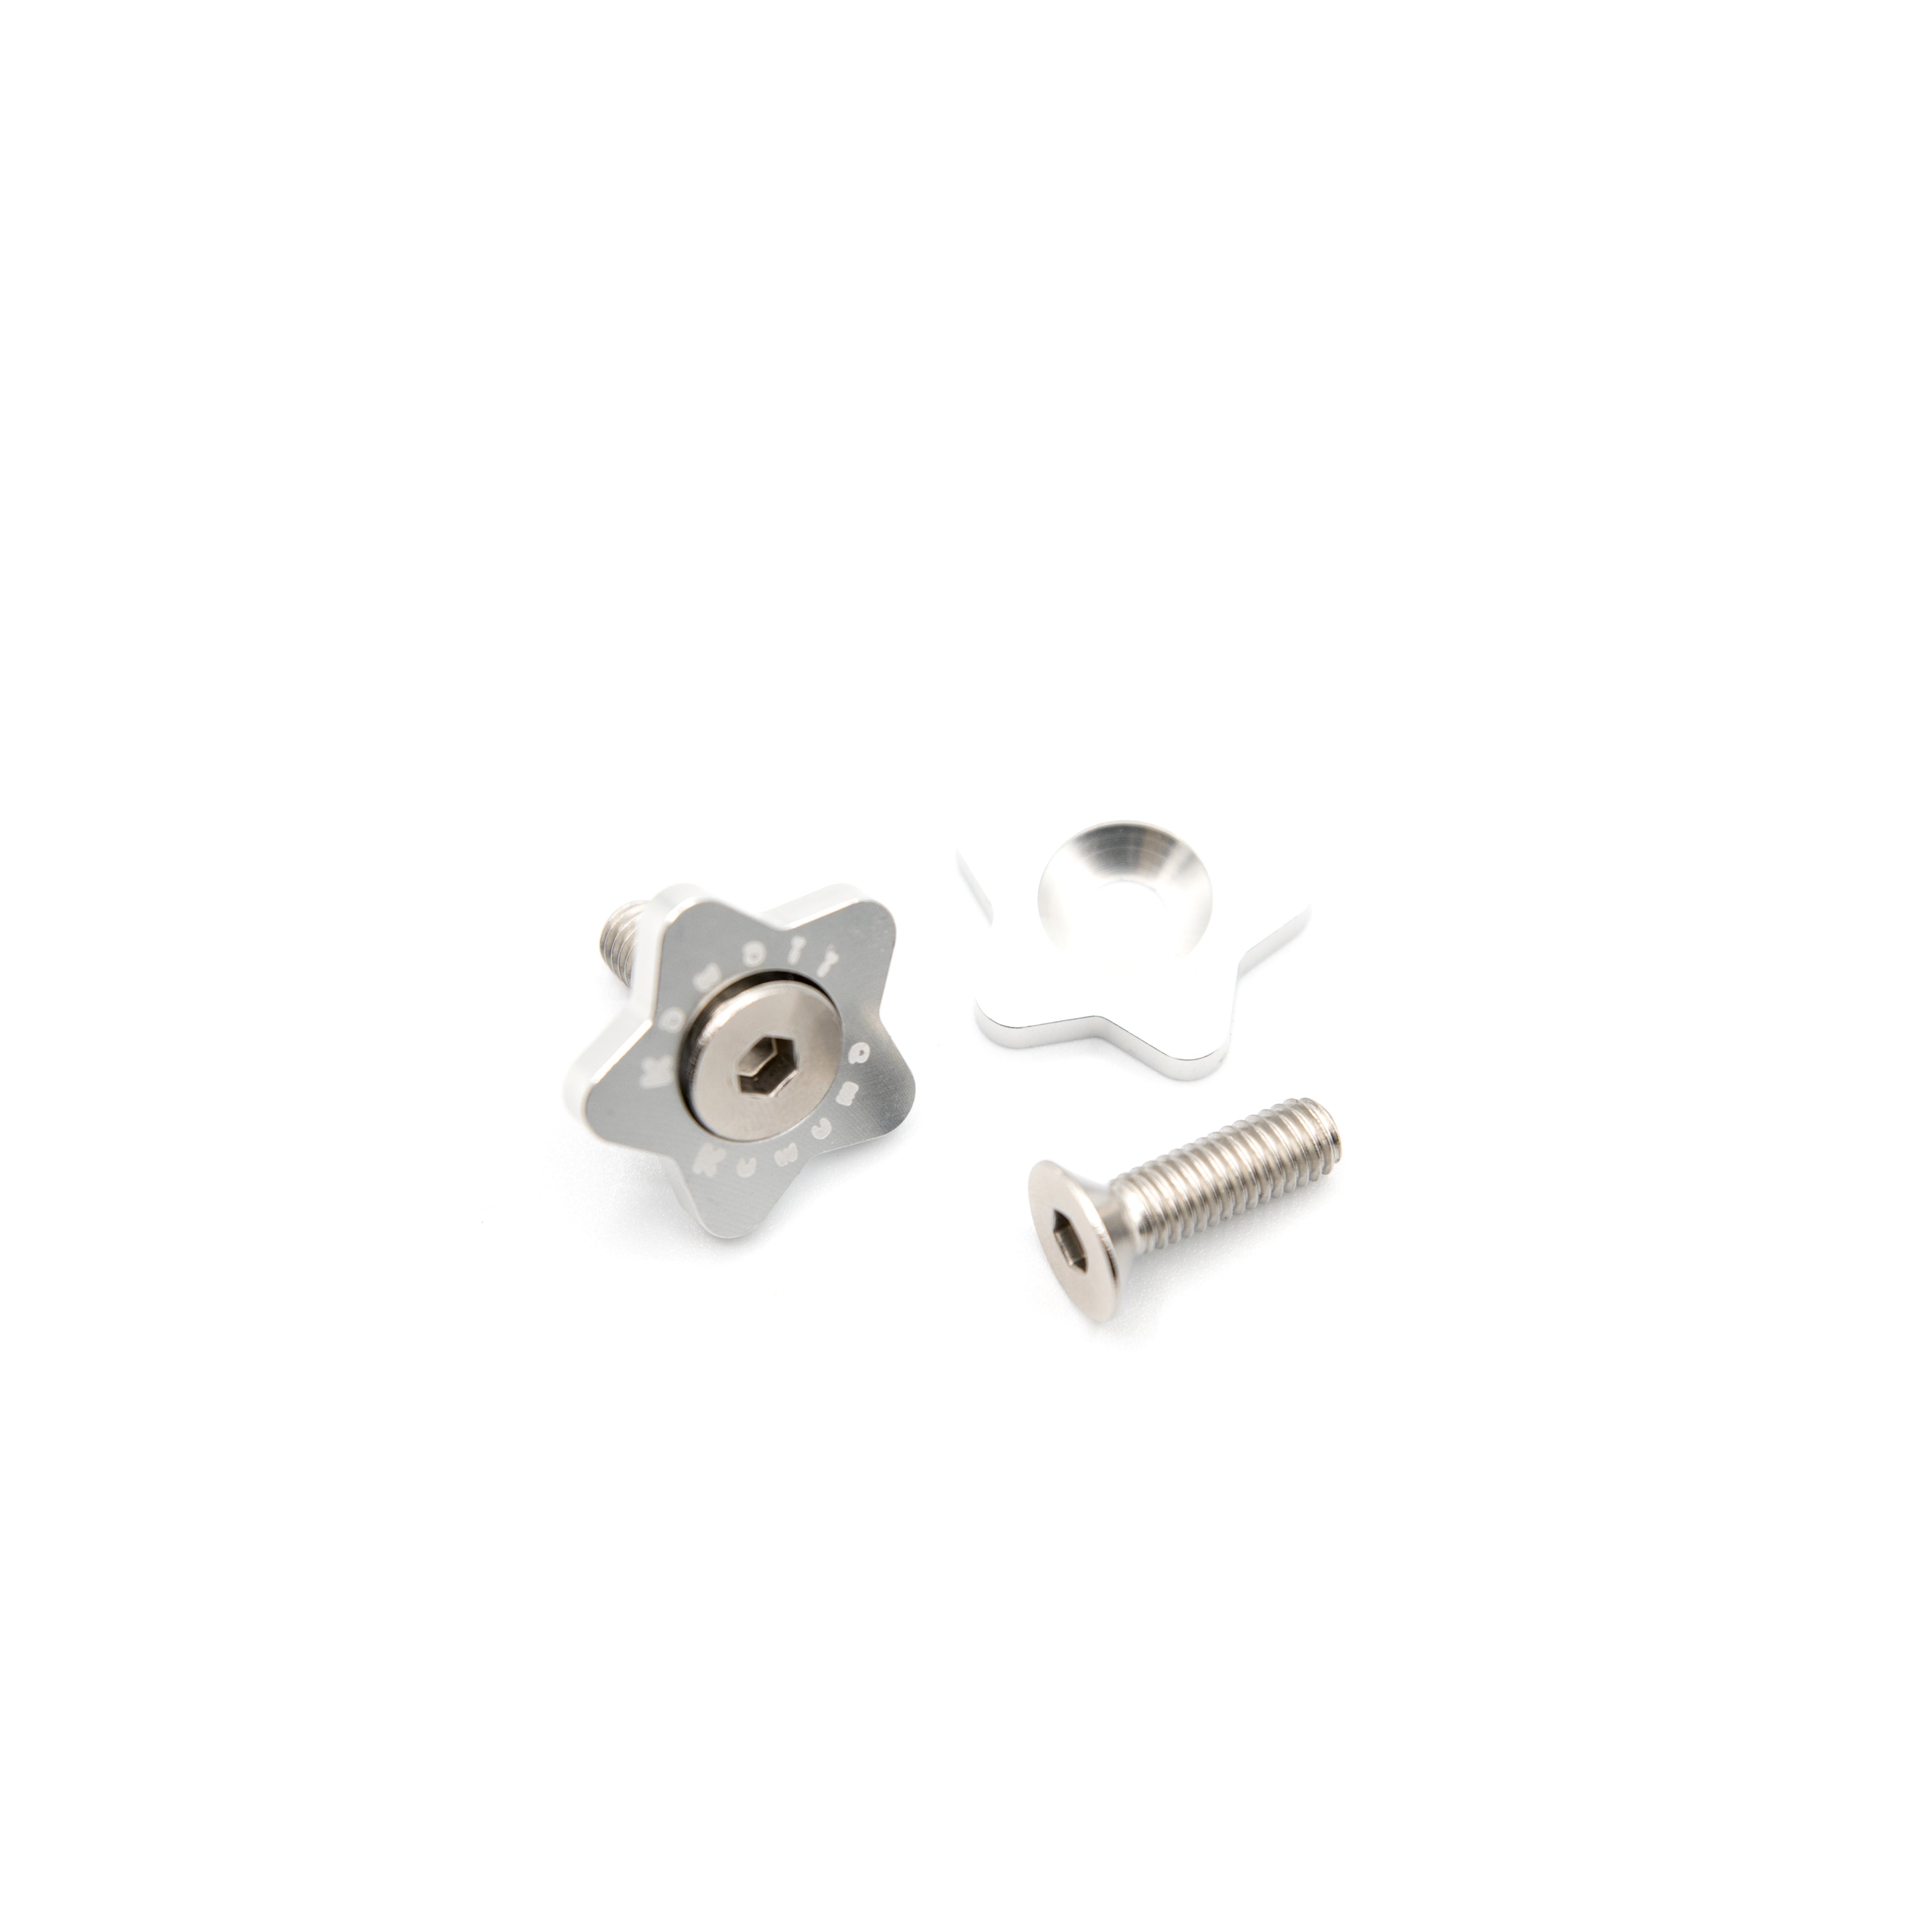 Star Shaped Washer Dress Up Hardware with M6 bolt